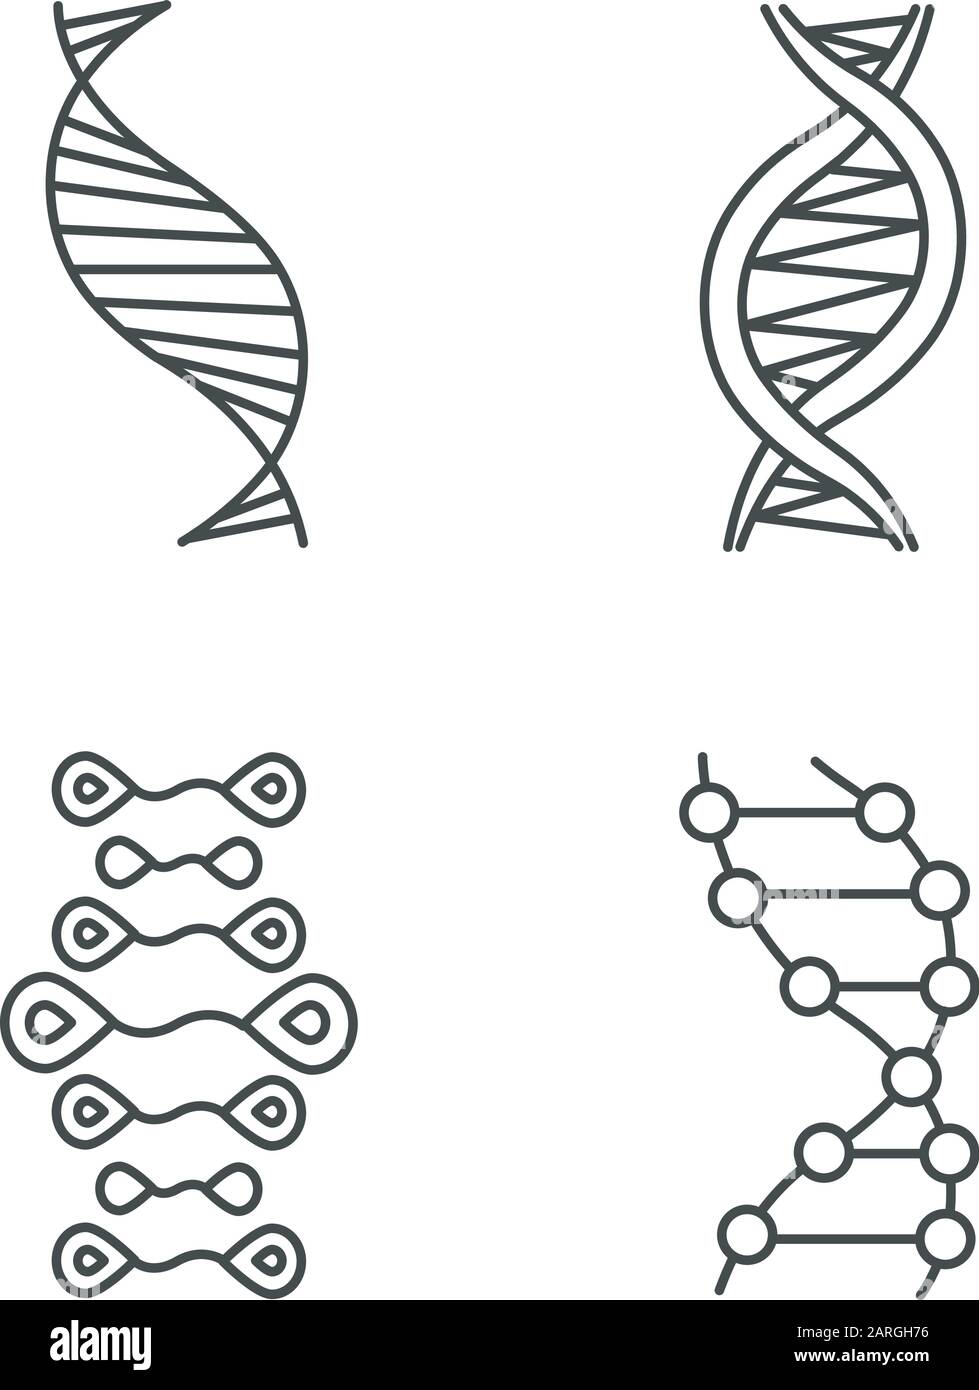 DNA strands linear icons set. Deoxyribonucleic, nucleic acid helix. Molecular biology. Genetic code. Genetics. Thin line contour symbols. Isolated vec Stock Vector